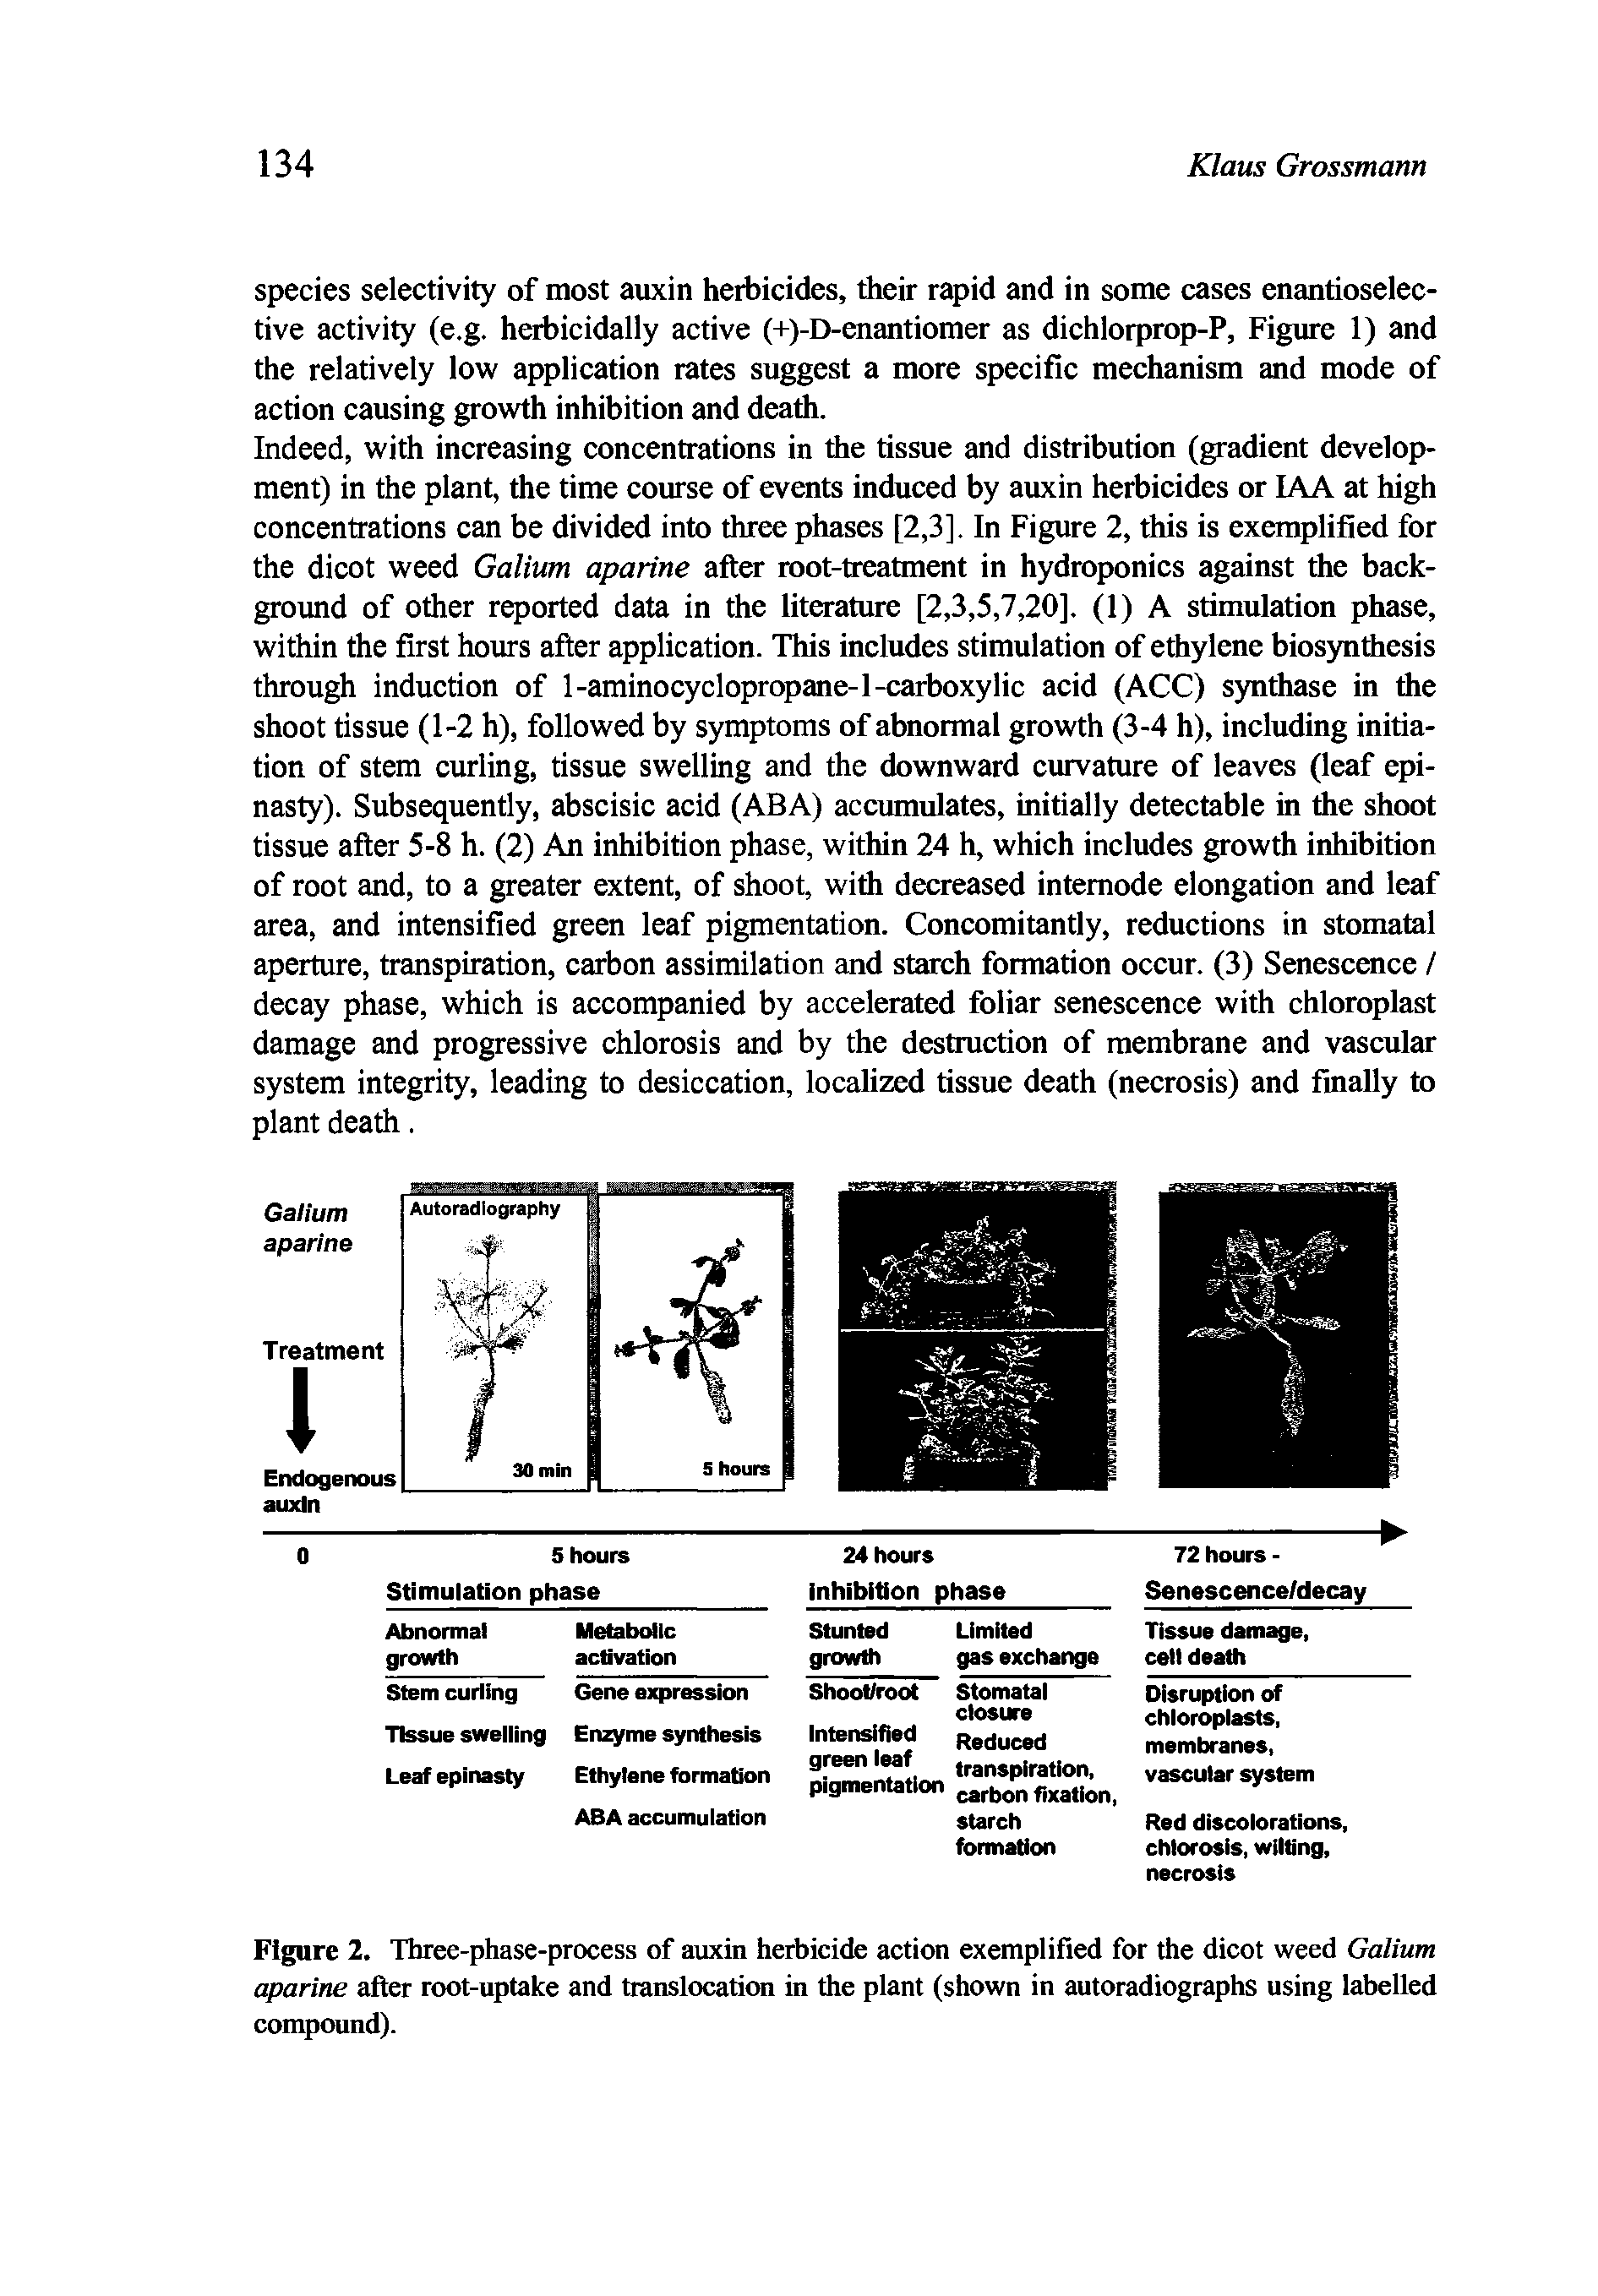 Figure 2. Three-phase-process of auxin herbicide action exemplified for the dicot weed Galium aparine after root-uptake and translocation in the plant (shown in autoradiographs using labelled compound).